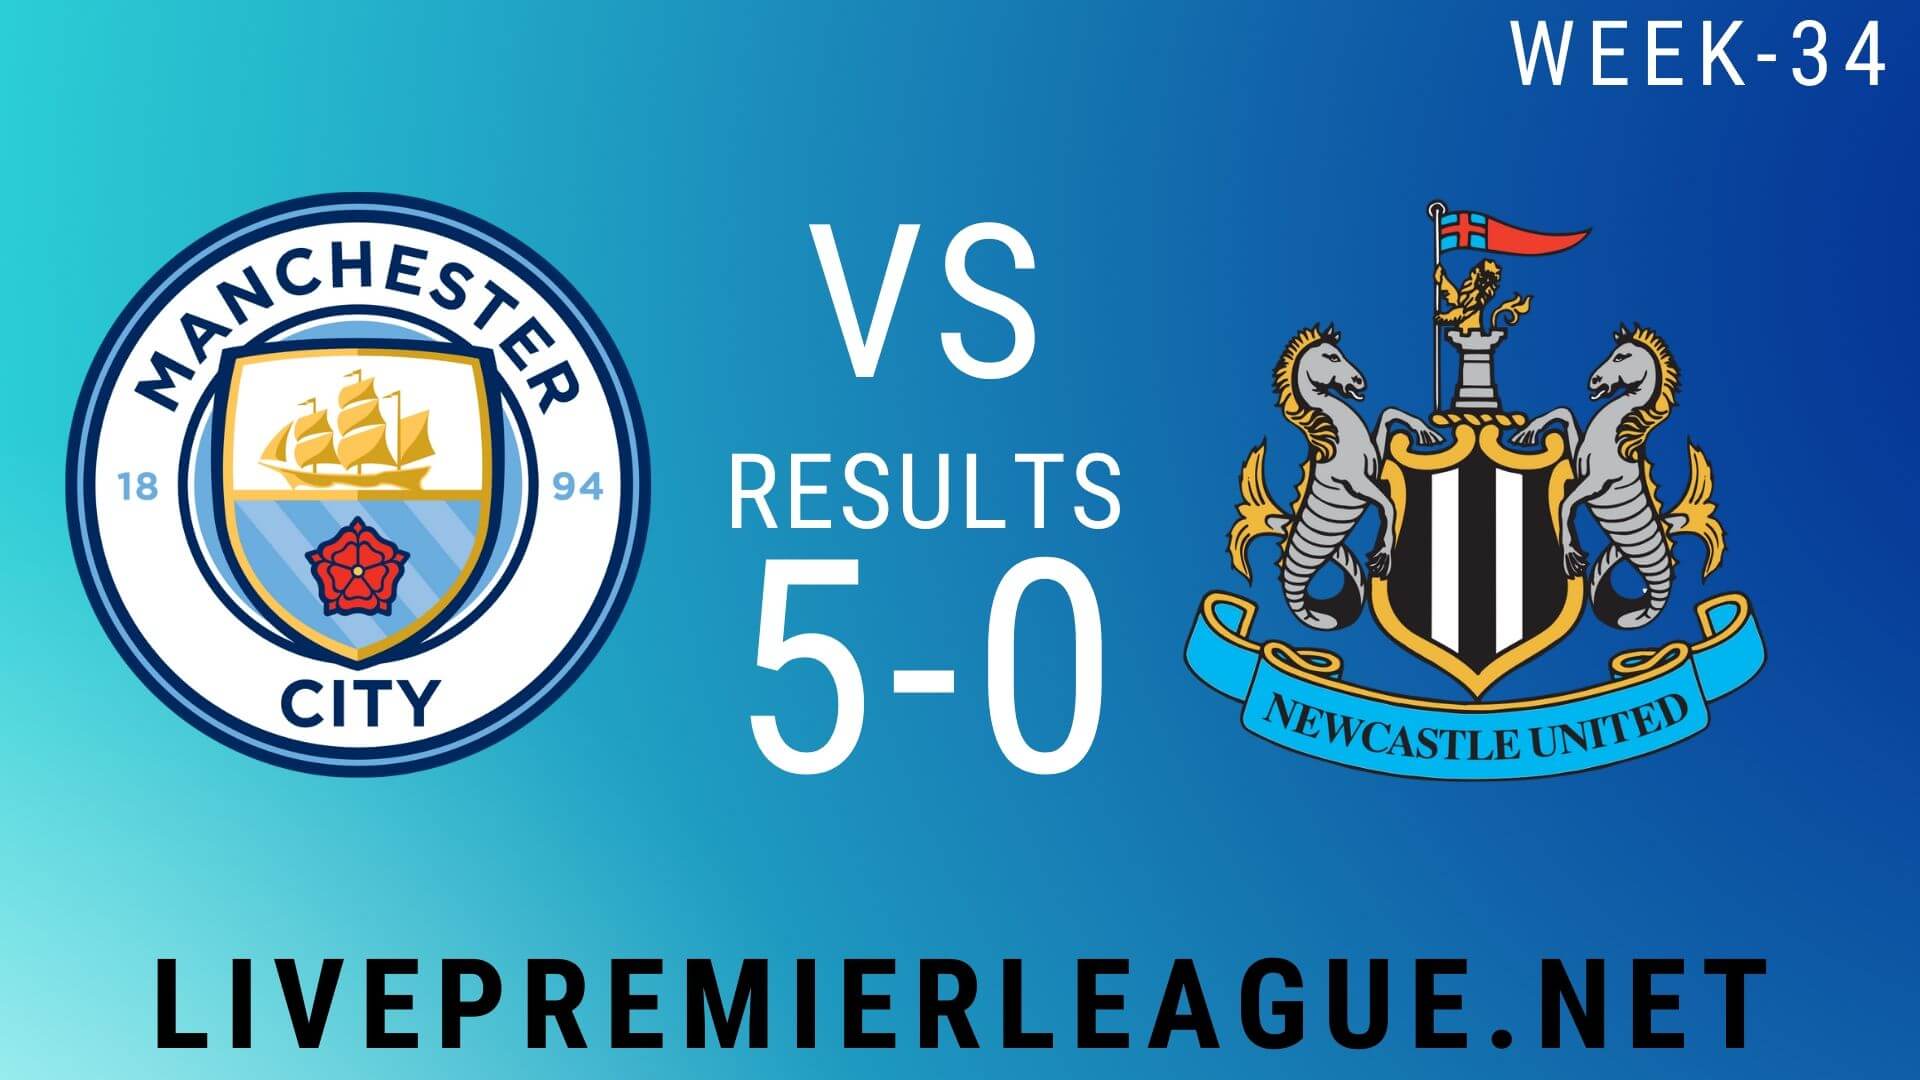 Manchester City Vs Newcastle United | Week 34 Result 2020